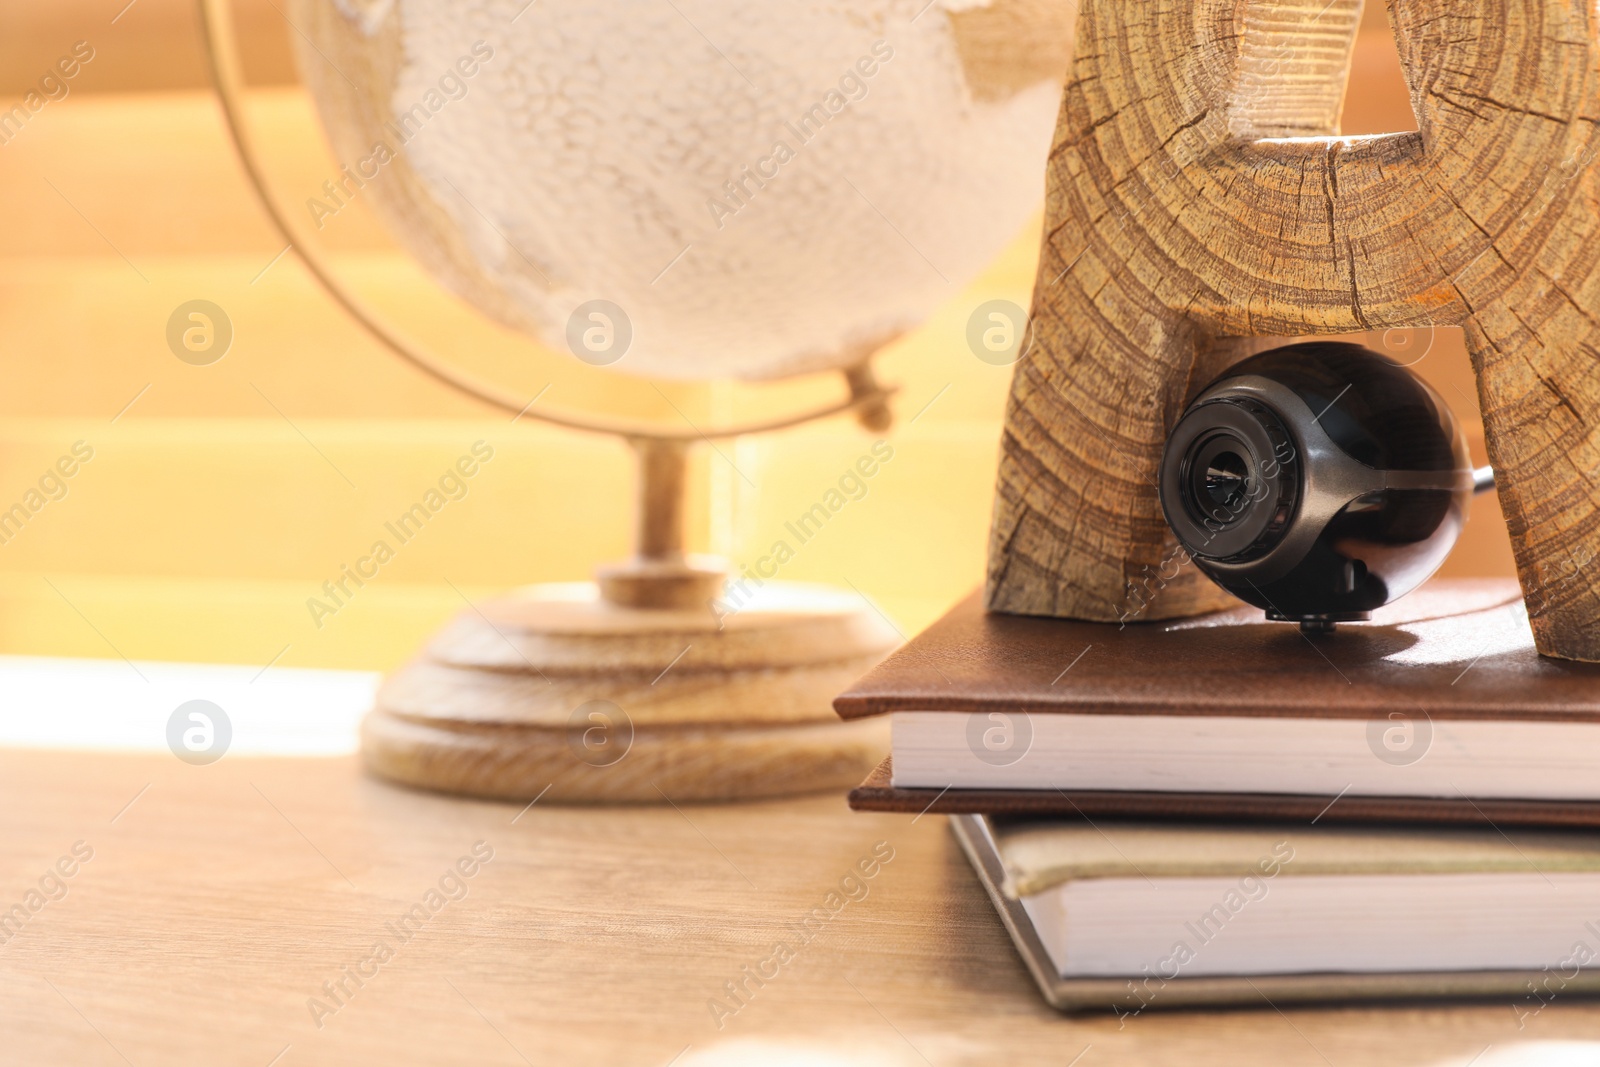 Photo of Small camera hidden among stationery on wooden desk against window indoors